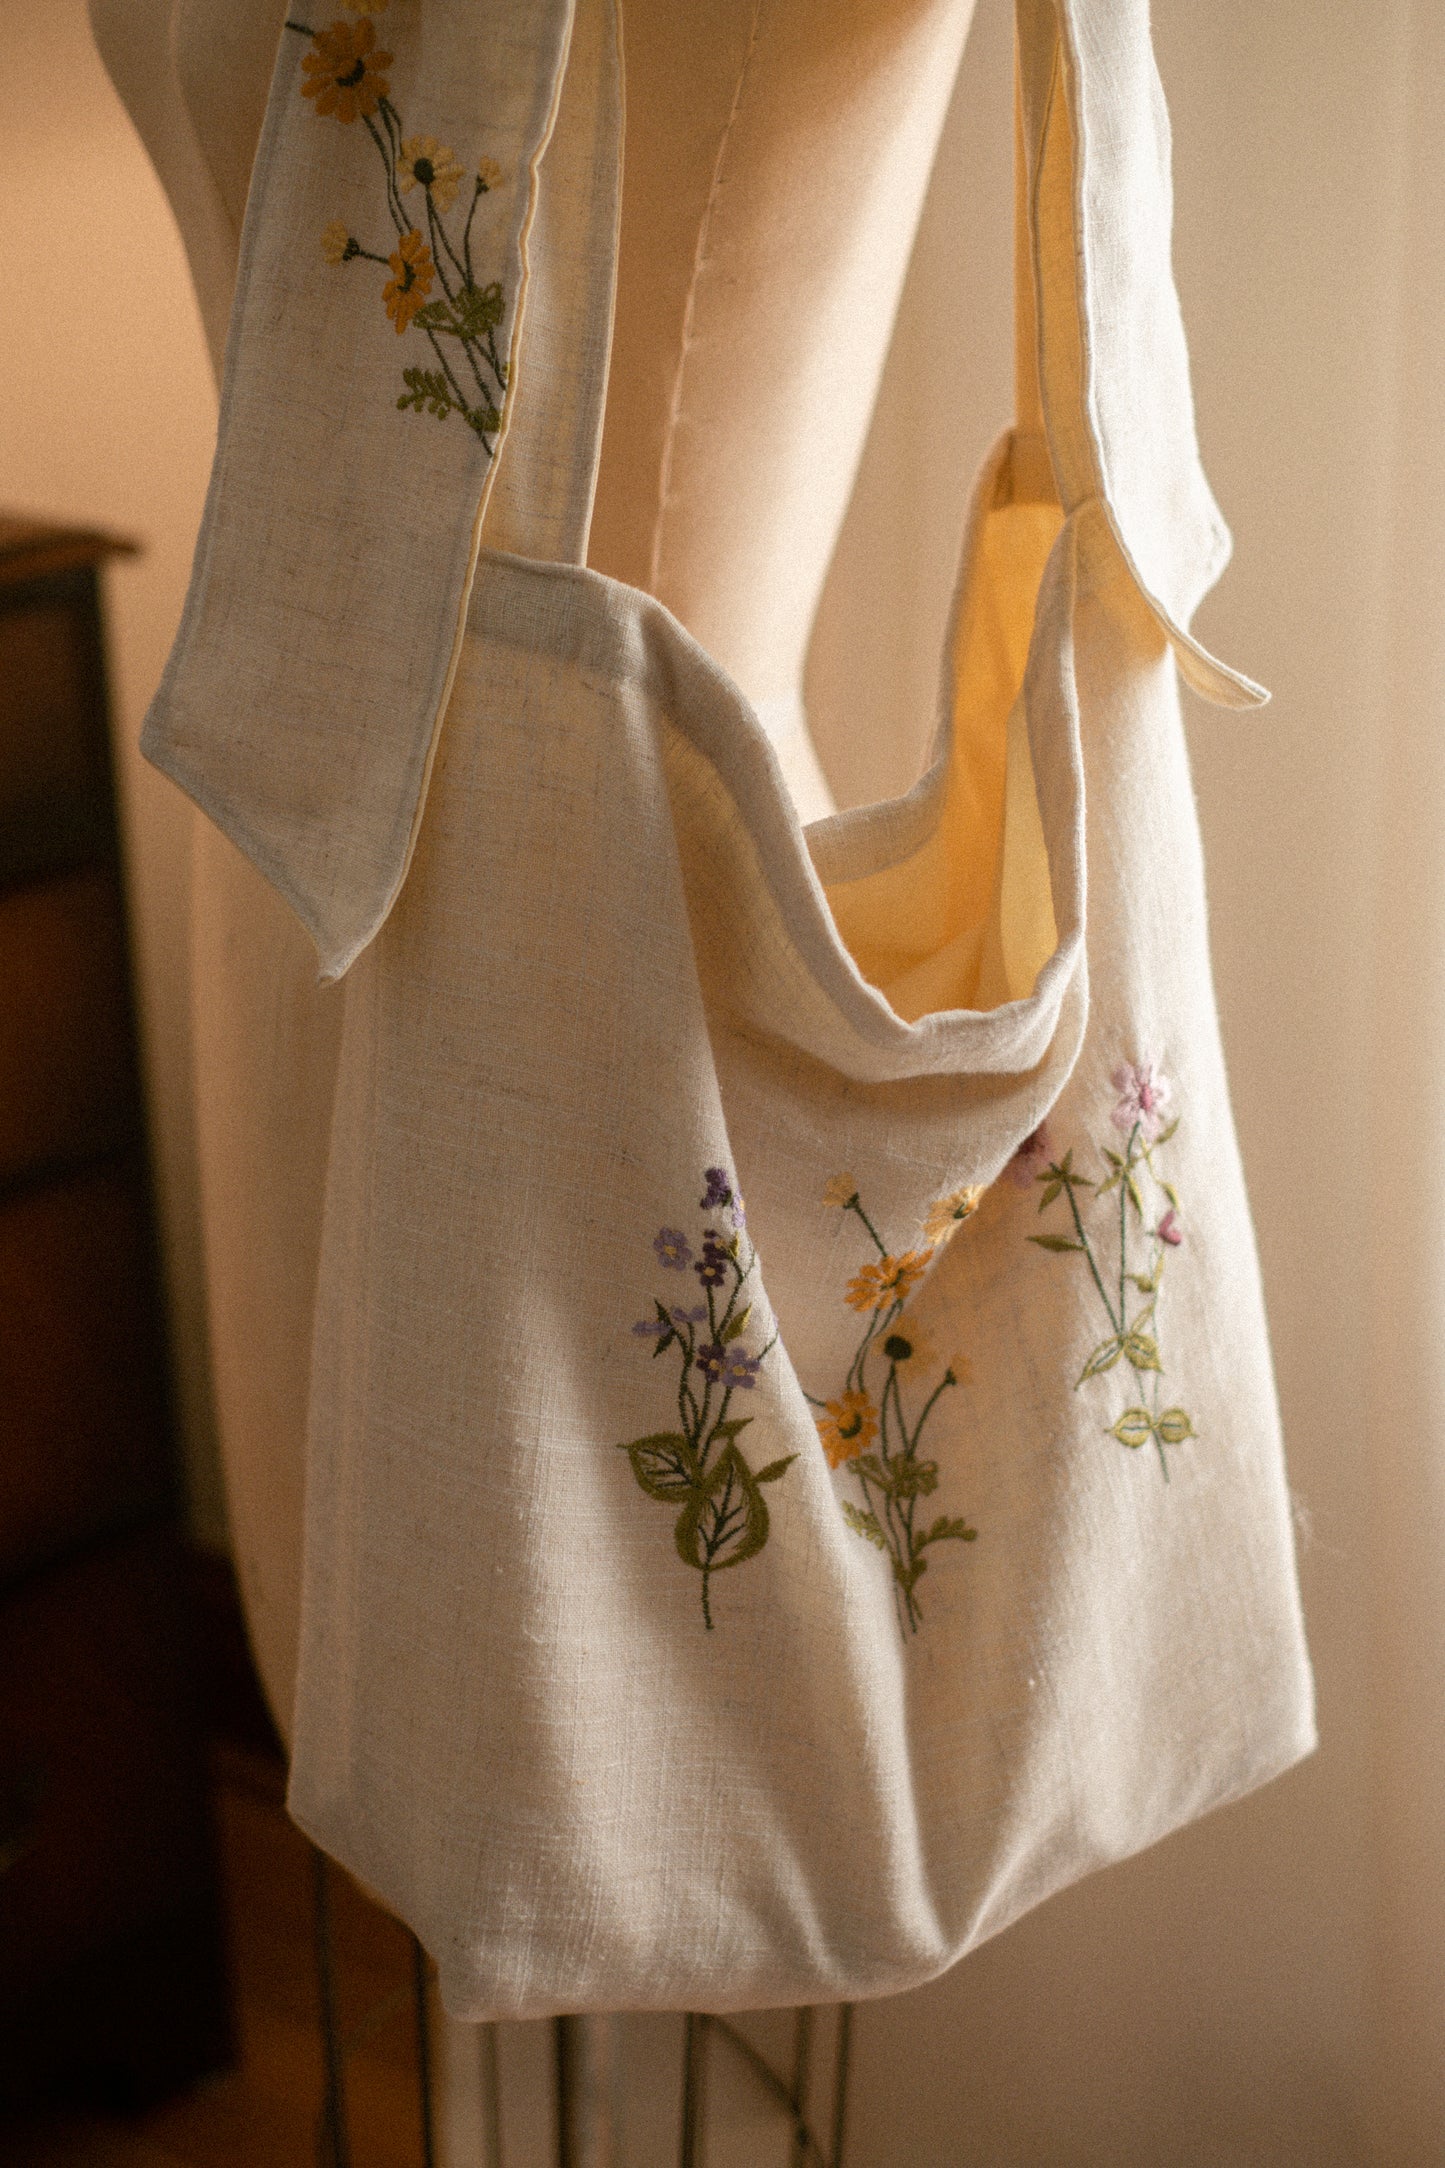 NEW♡ Handmade Ribbon floral embroidered tote bag - Daisy